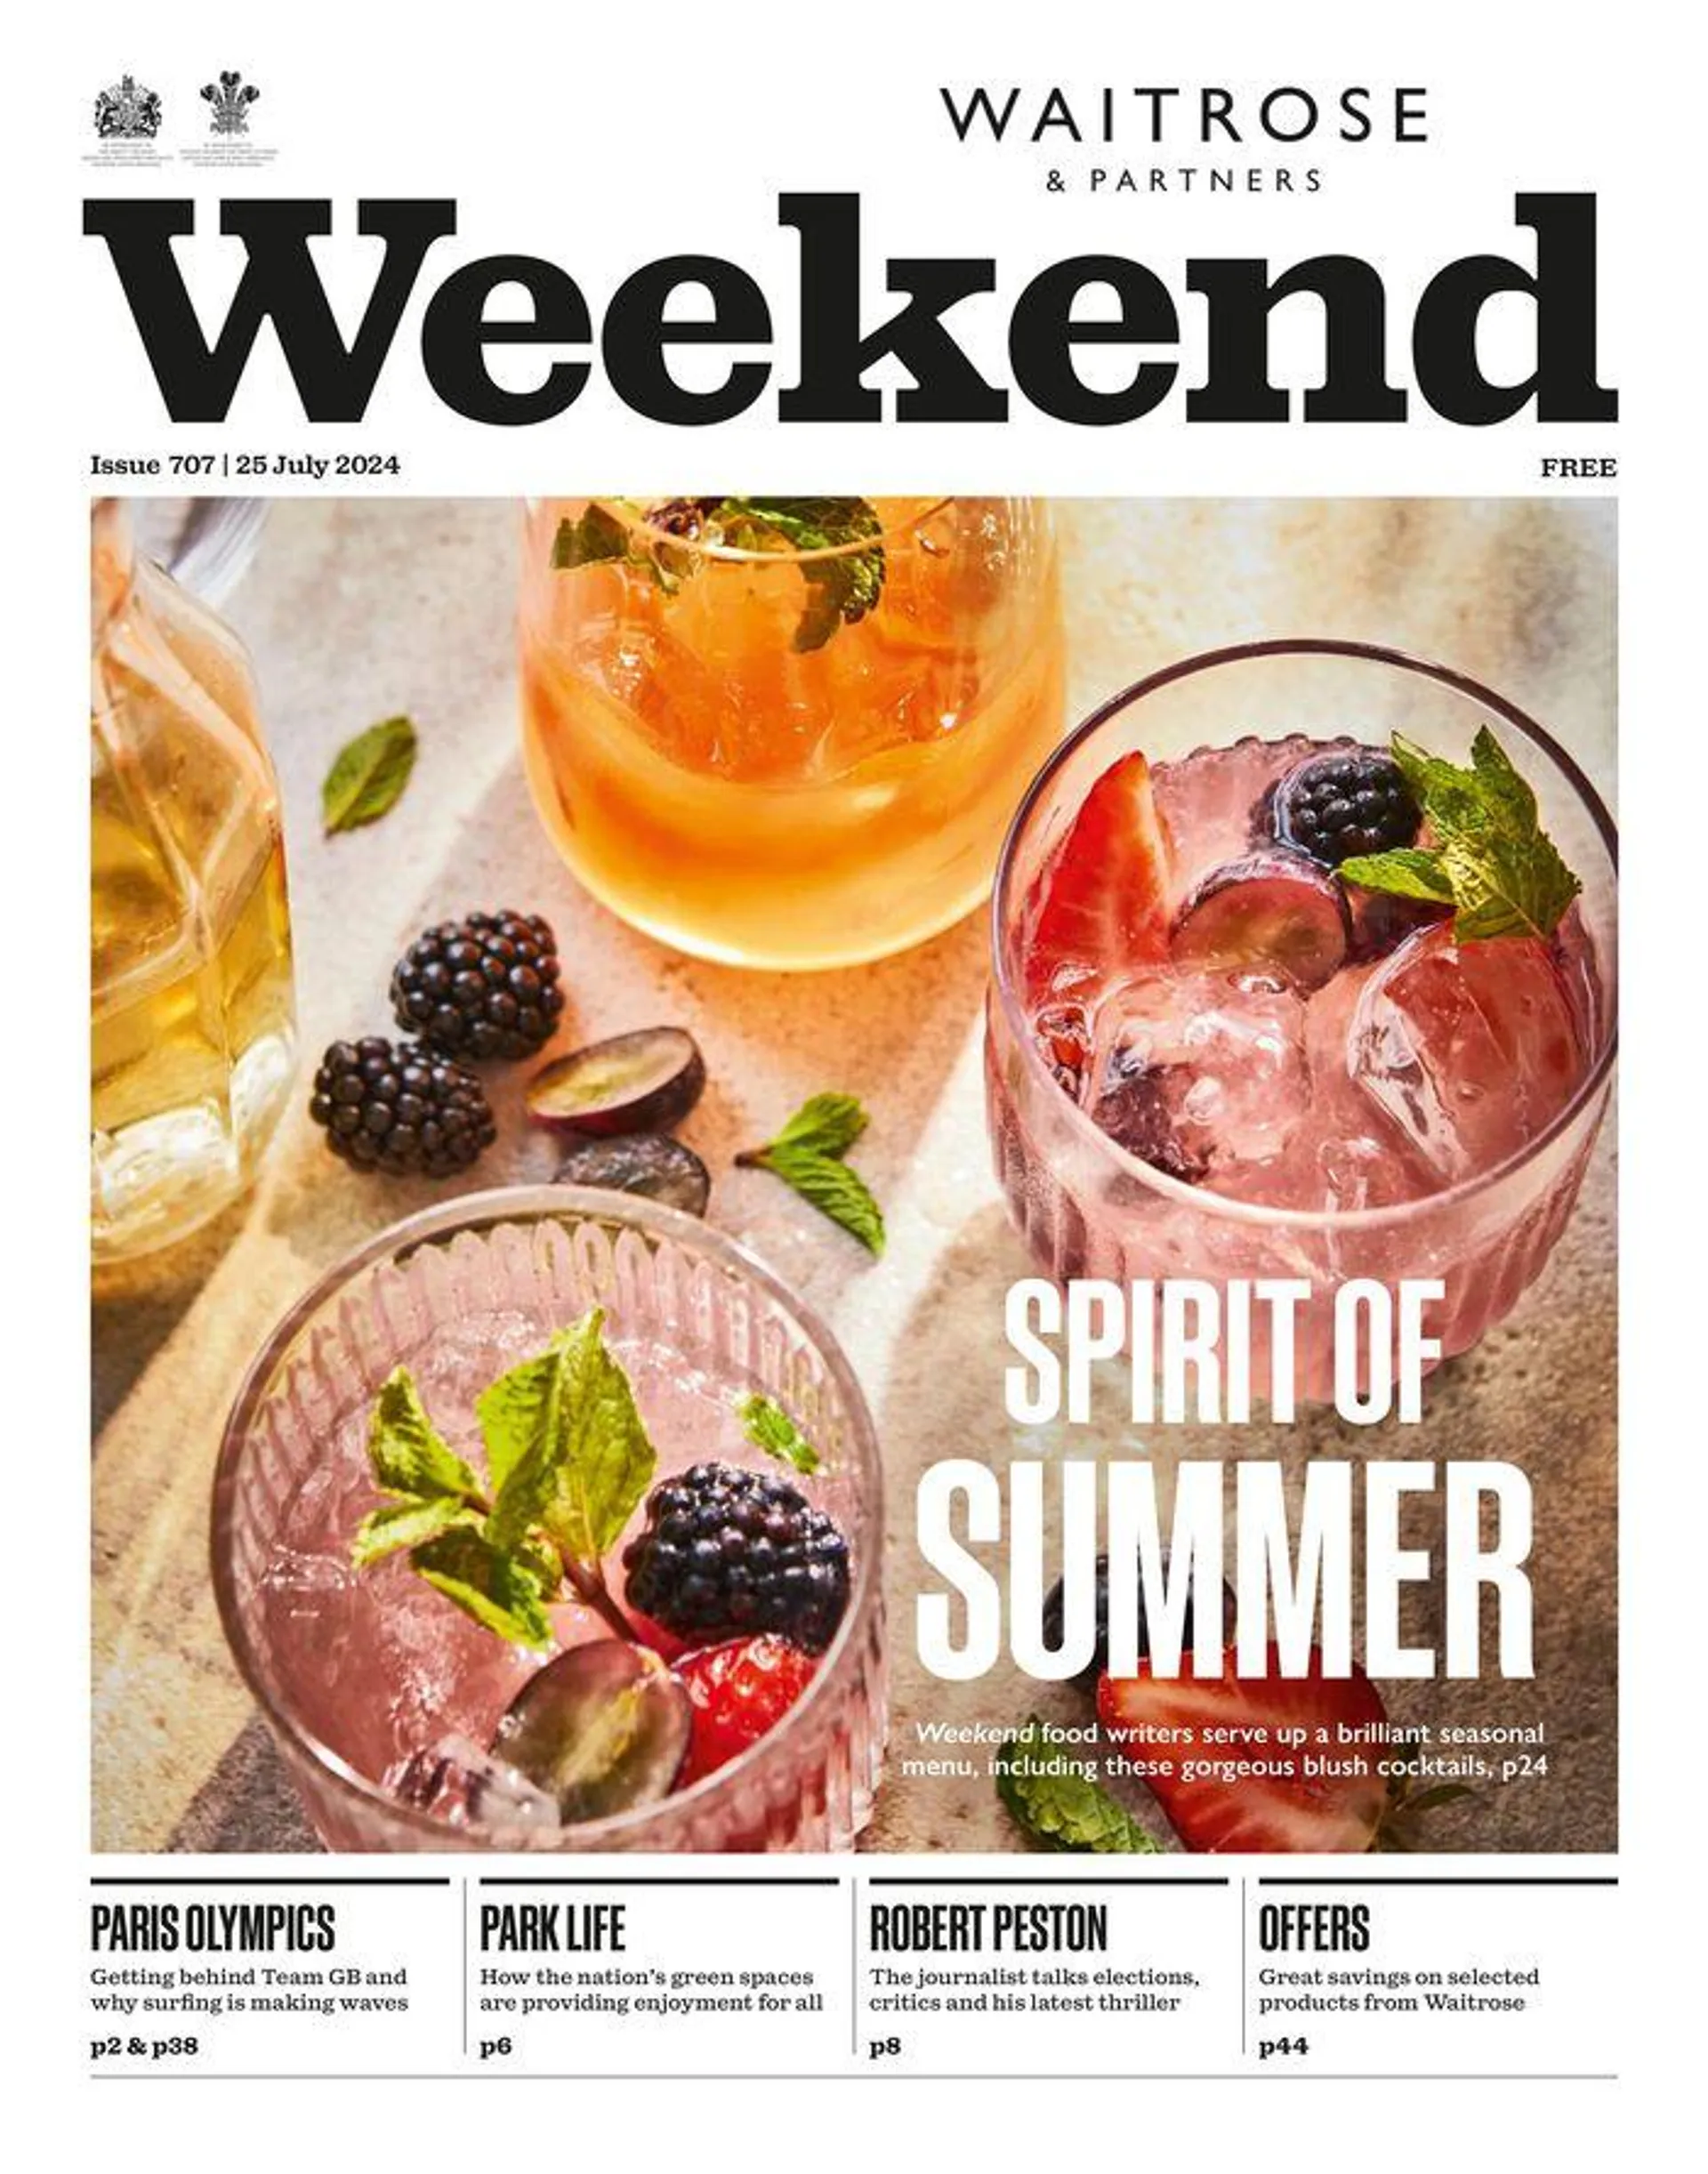 Weekend Issue 707 - 1